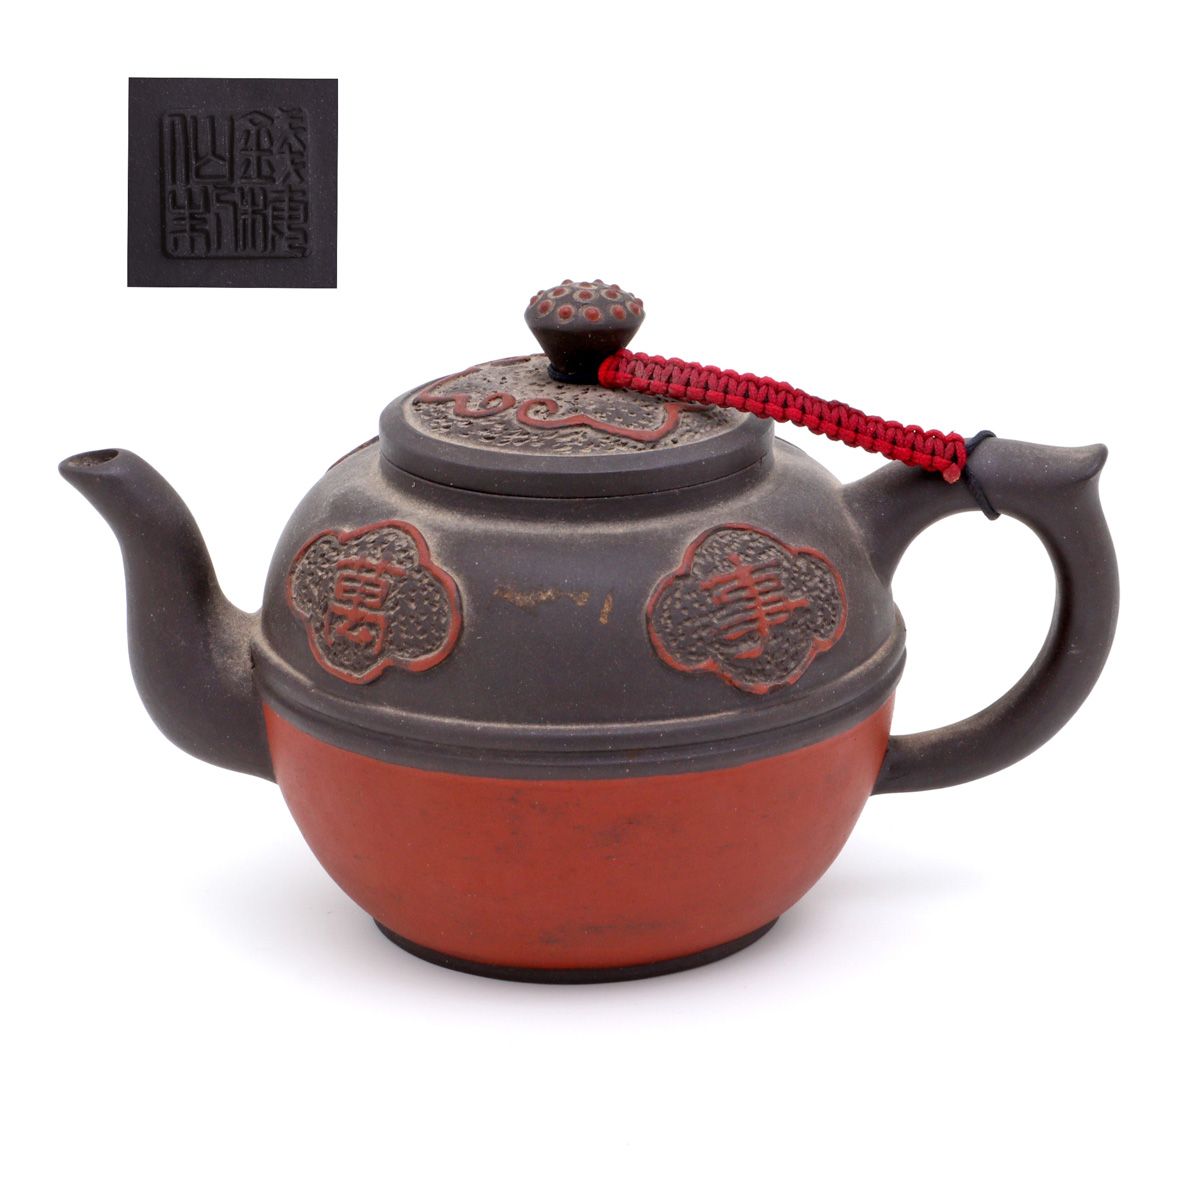 A Yixing teapot A YIXING TEAPOT Chinese terracotta, four cartouches with caracte&hellip;